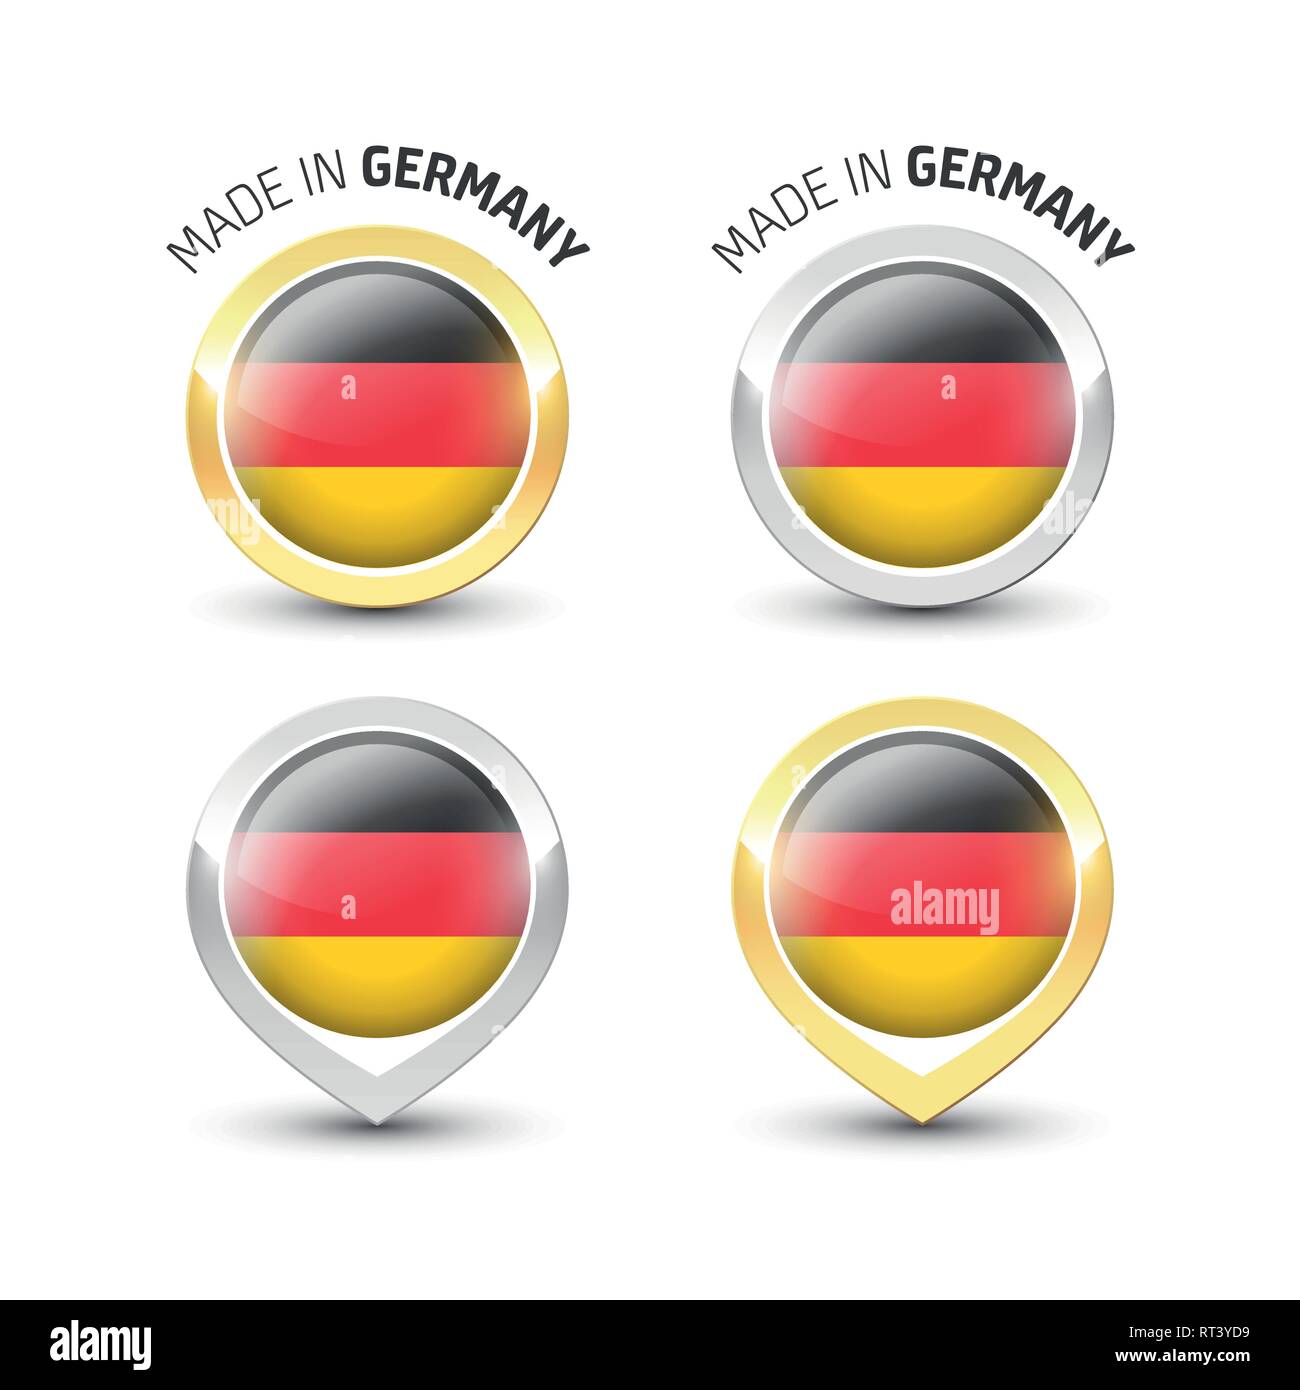 Made in Germany - Guarantee label with the German flag inside round gold and silver icons. Stock Vector